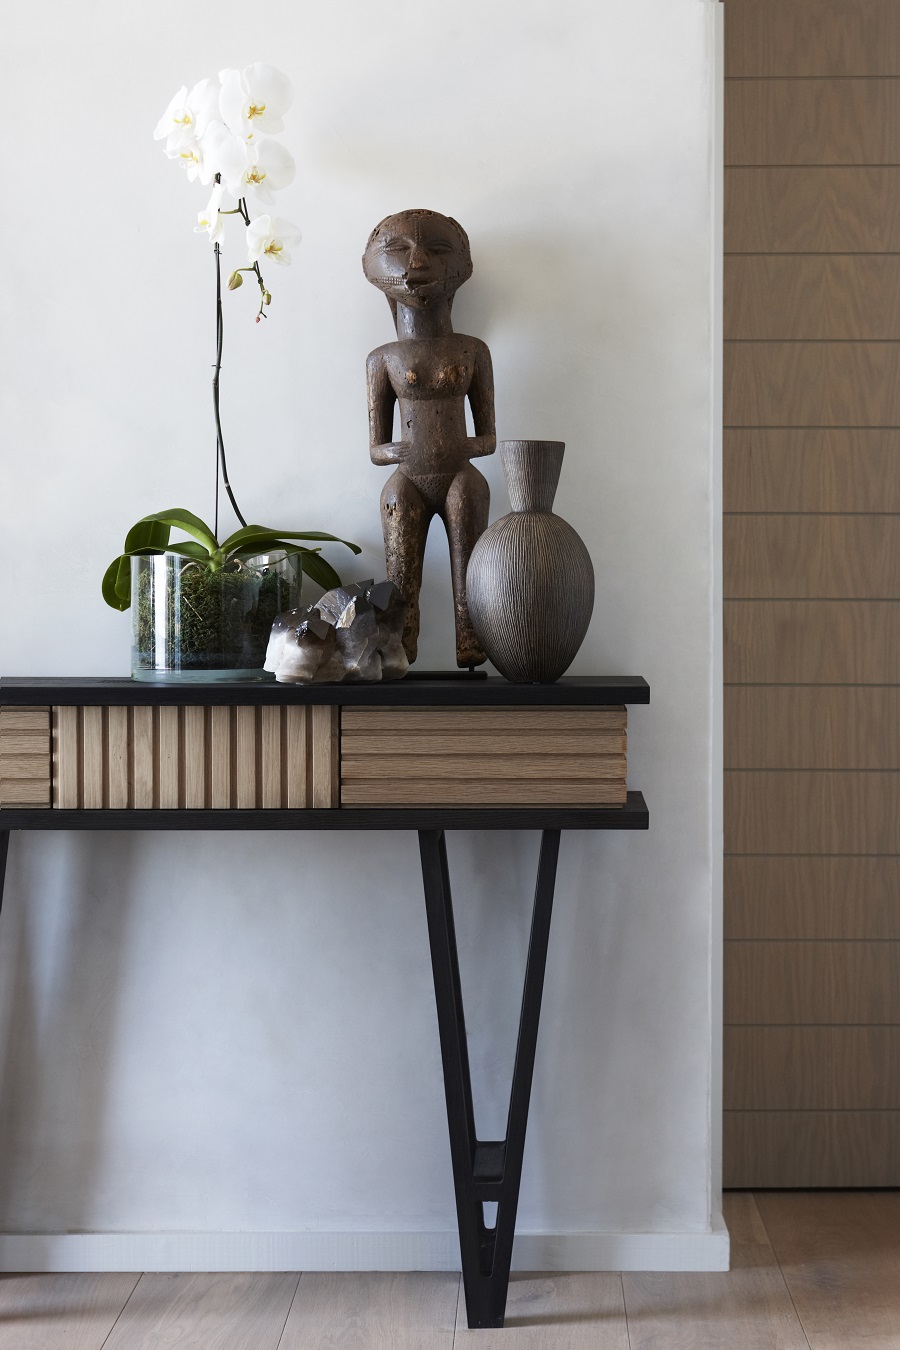 Most of furniture, like this console table, was custom-made to show off a modern take on traditional African culture